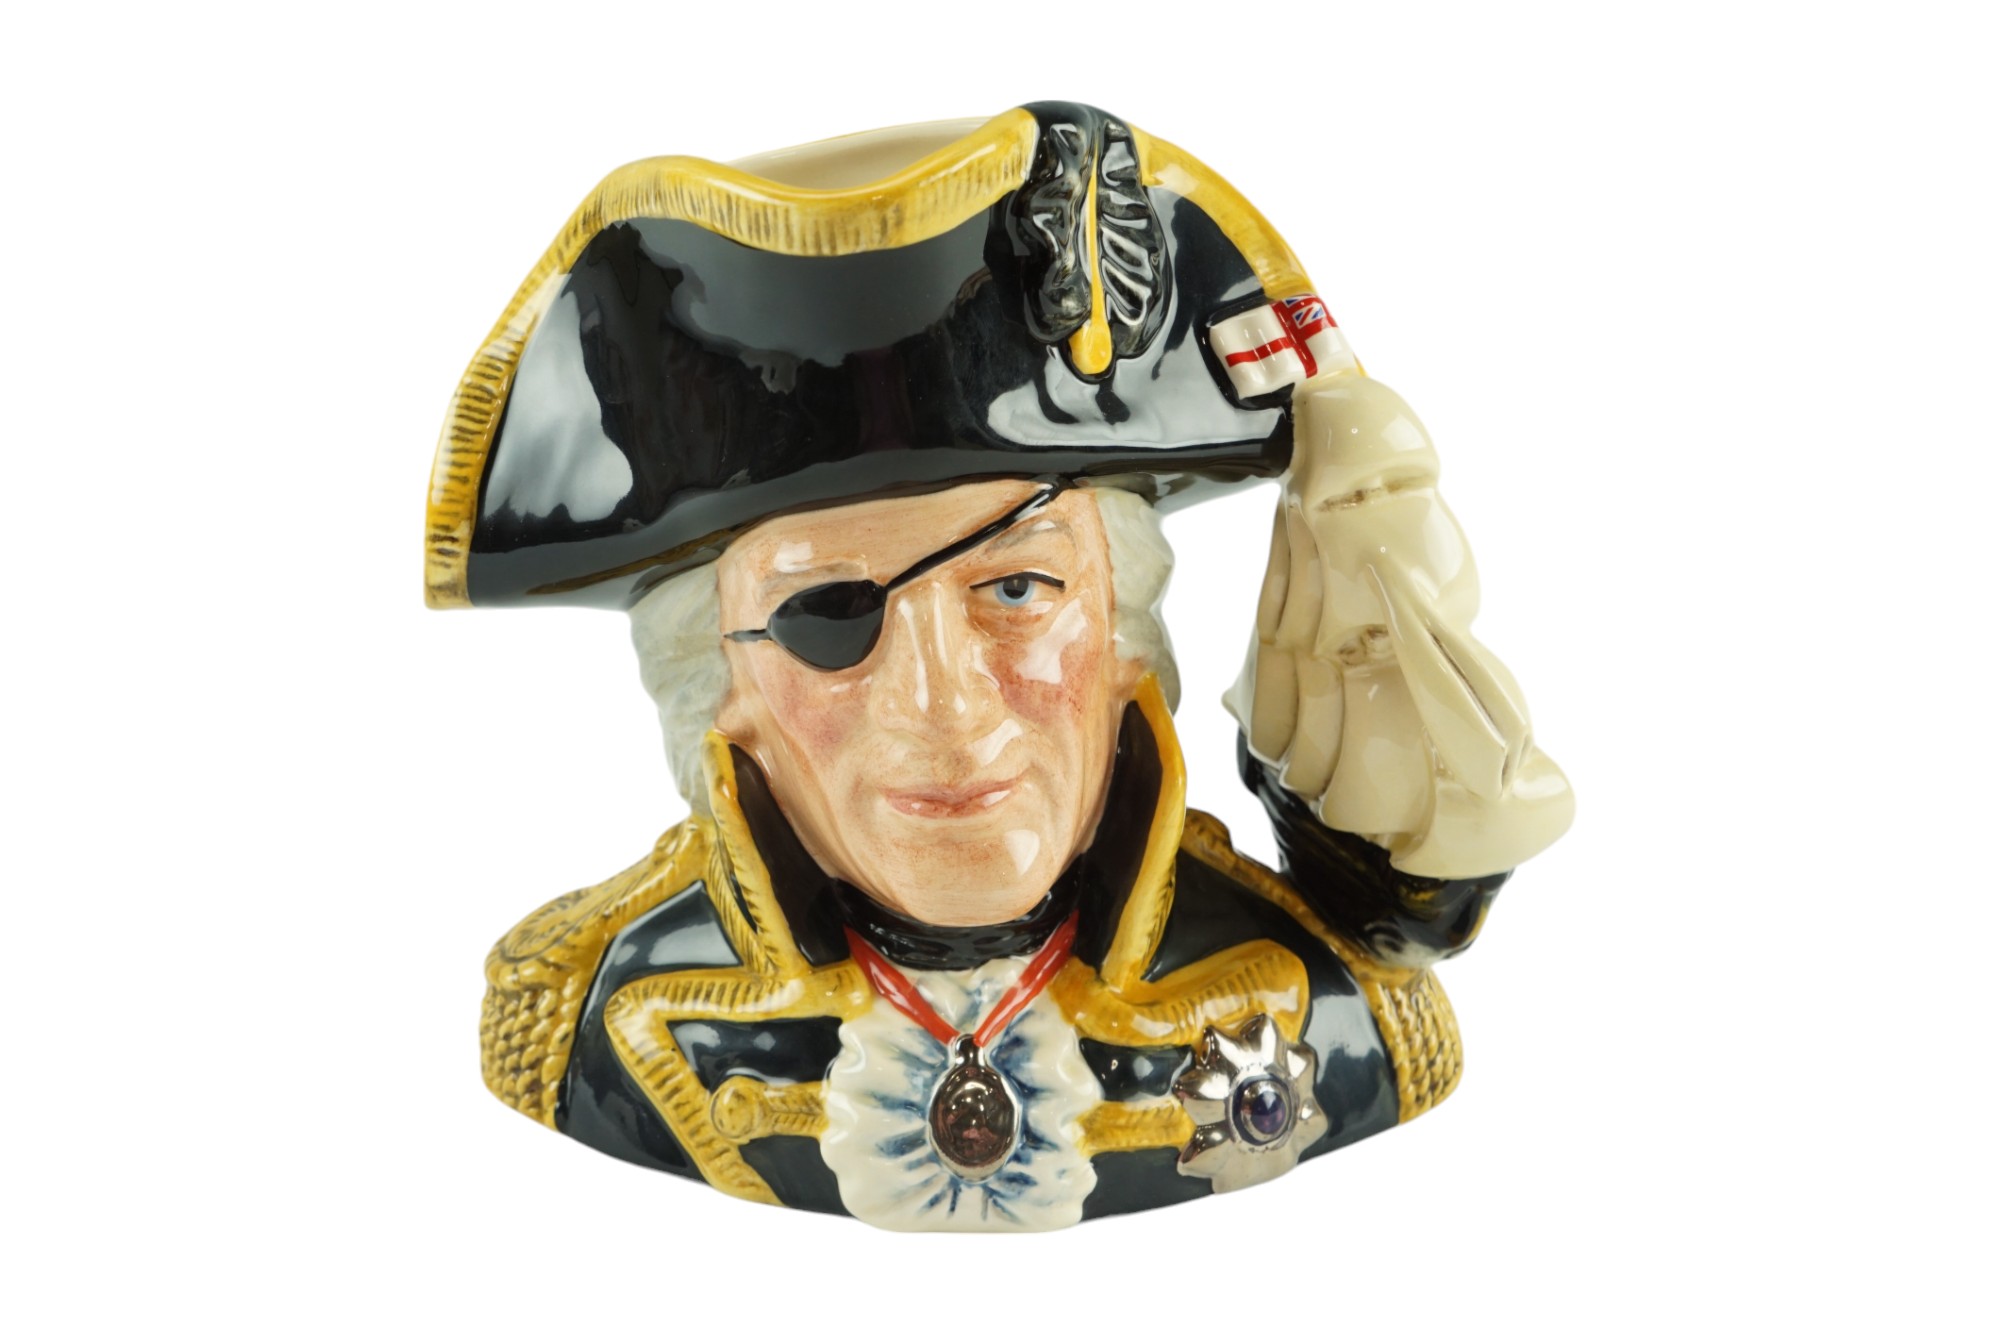 A 1993 Royal Doulton Vice-Admiral Lord Nelson Character Jug, D 6932, 17 cm